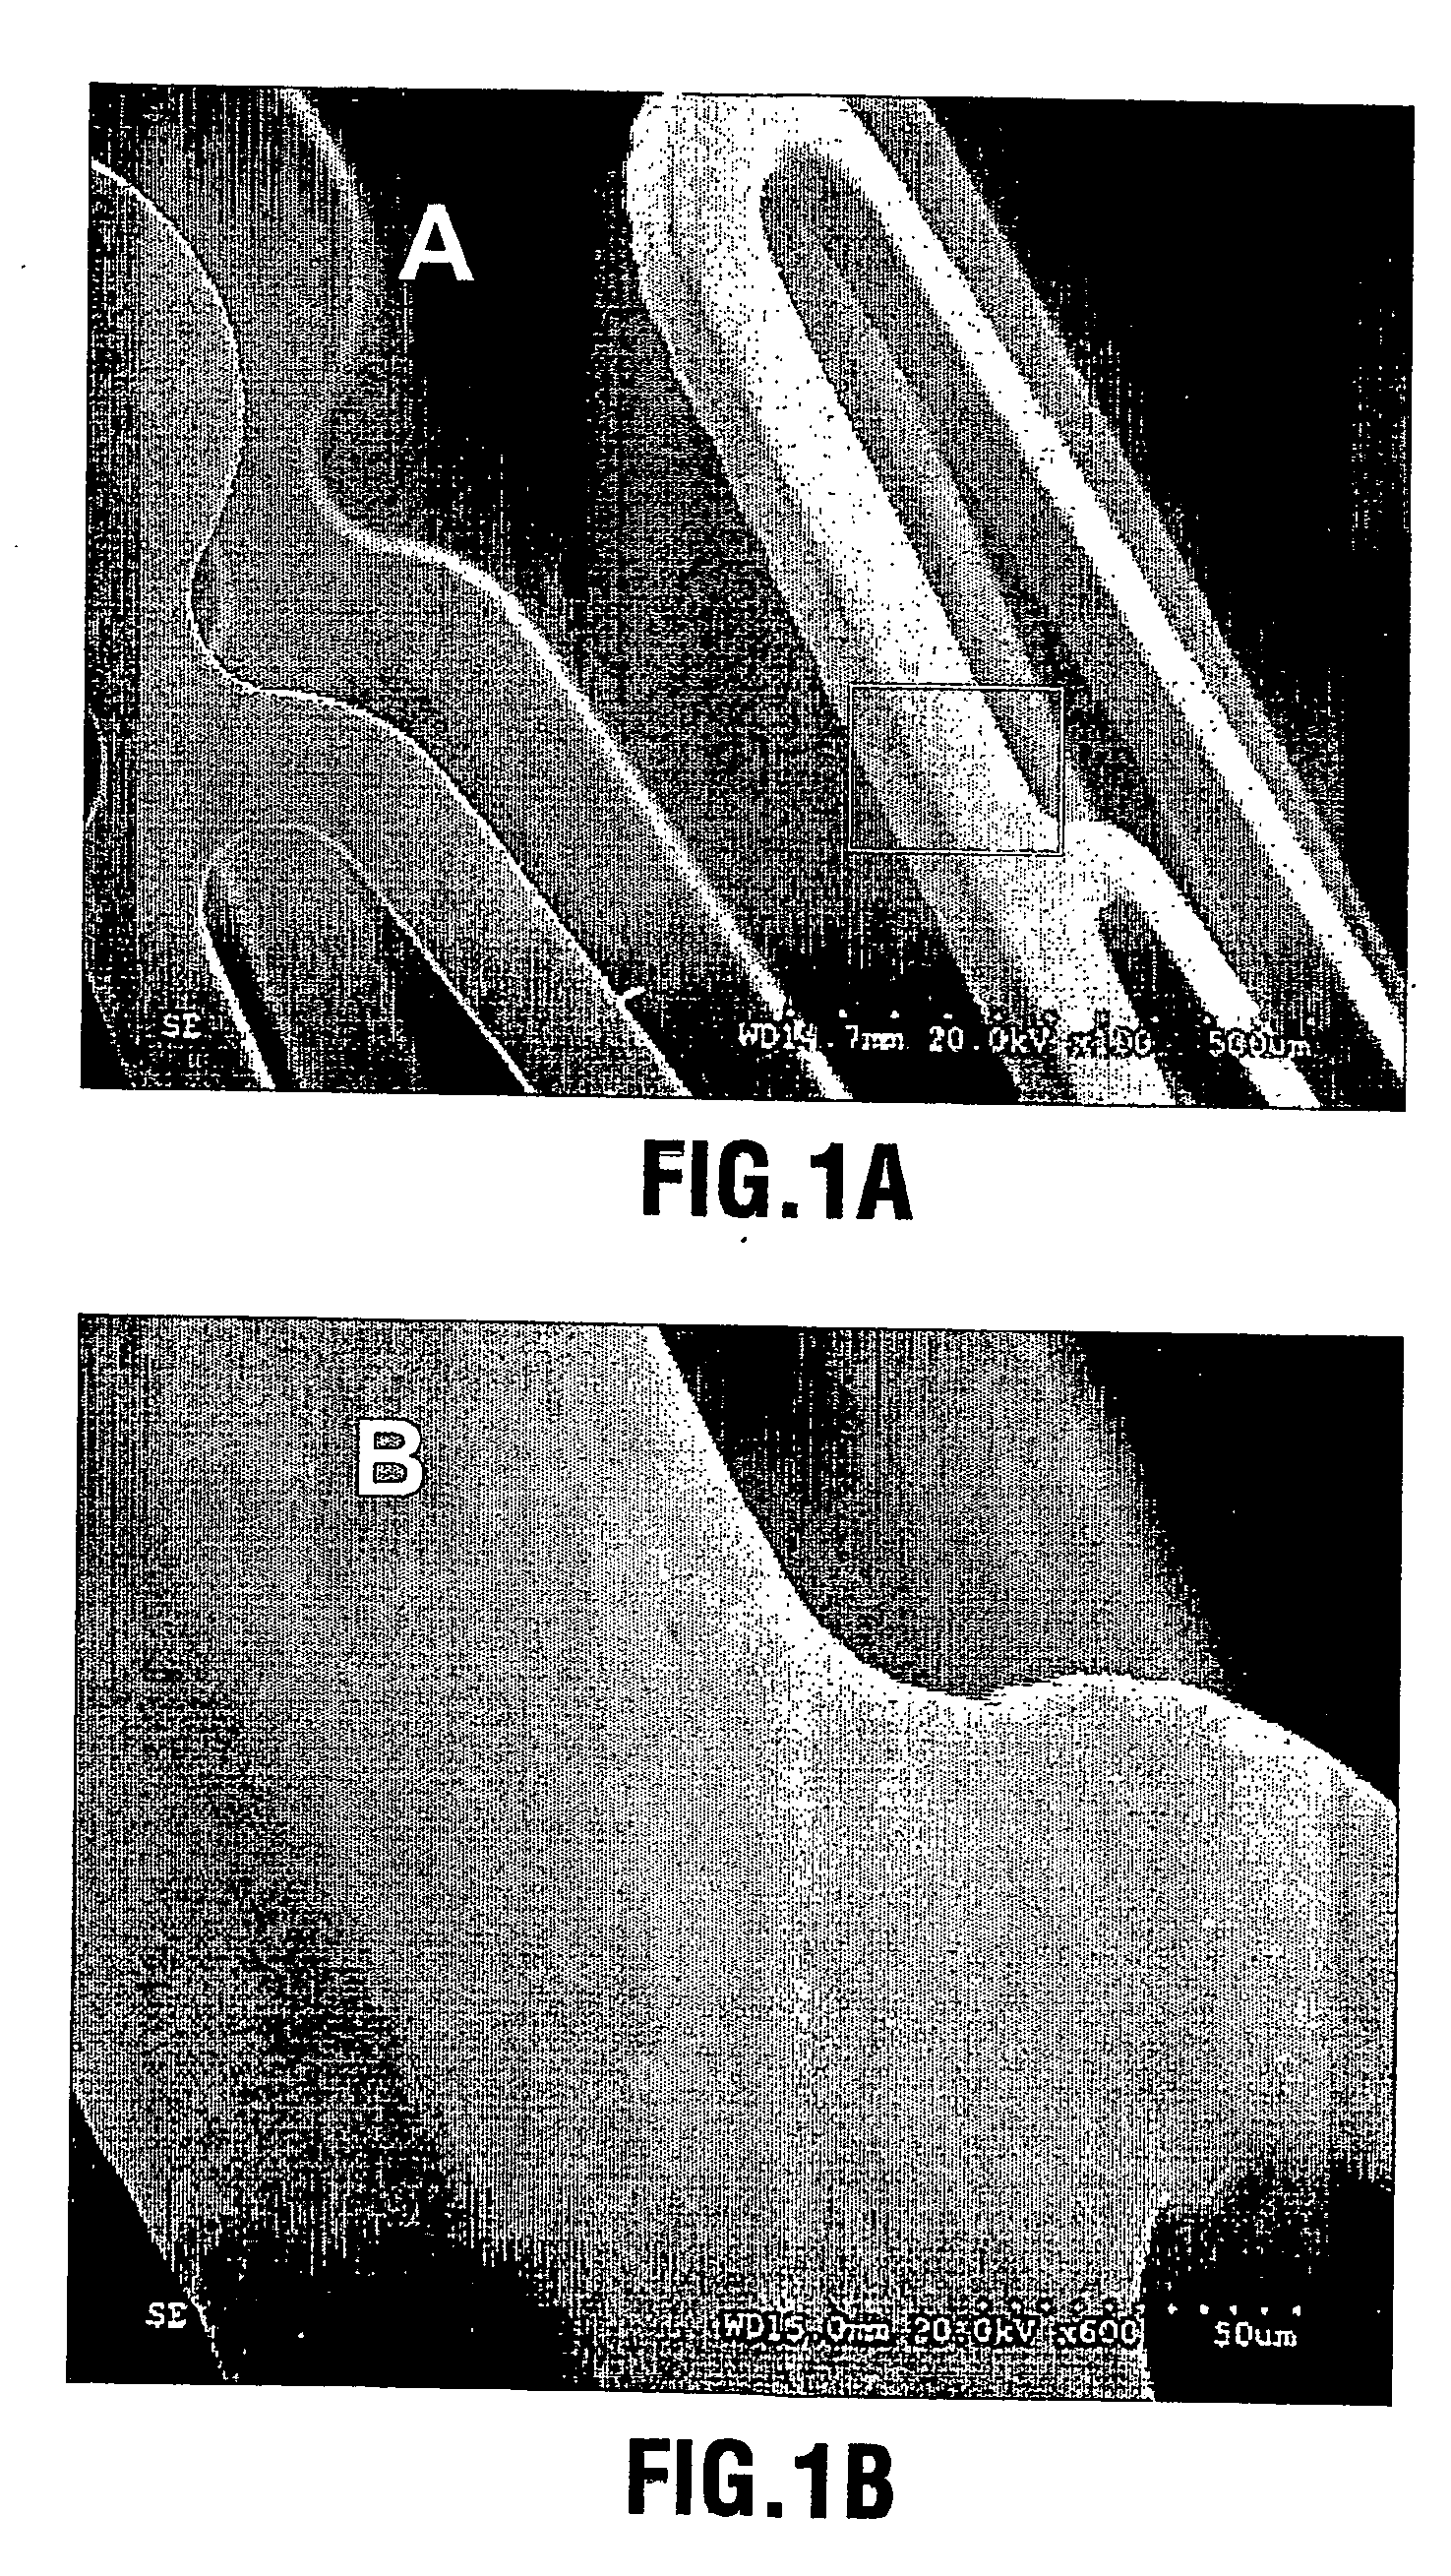 Calcium phosphate coated implantable medical devices and processes for making same